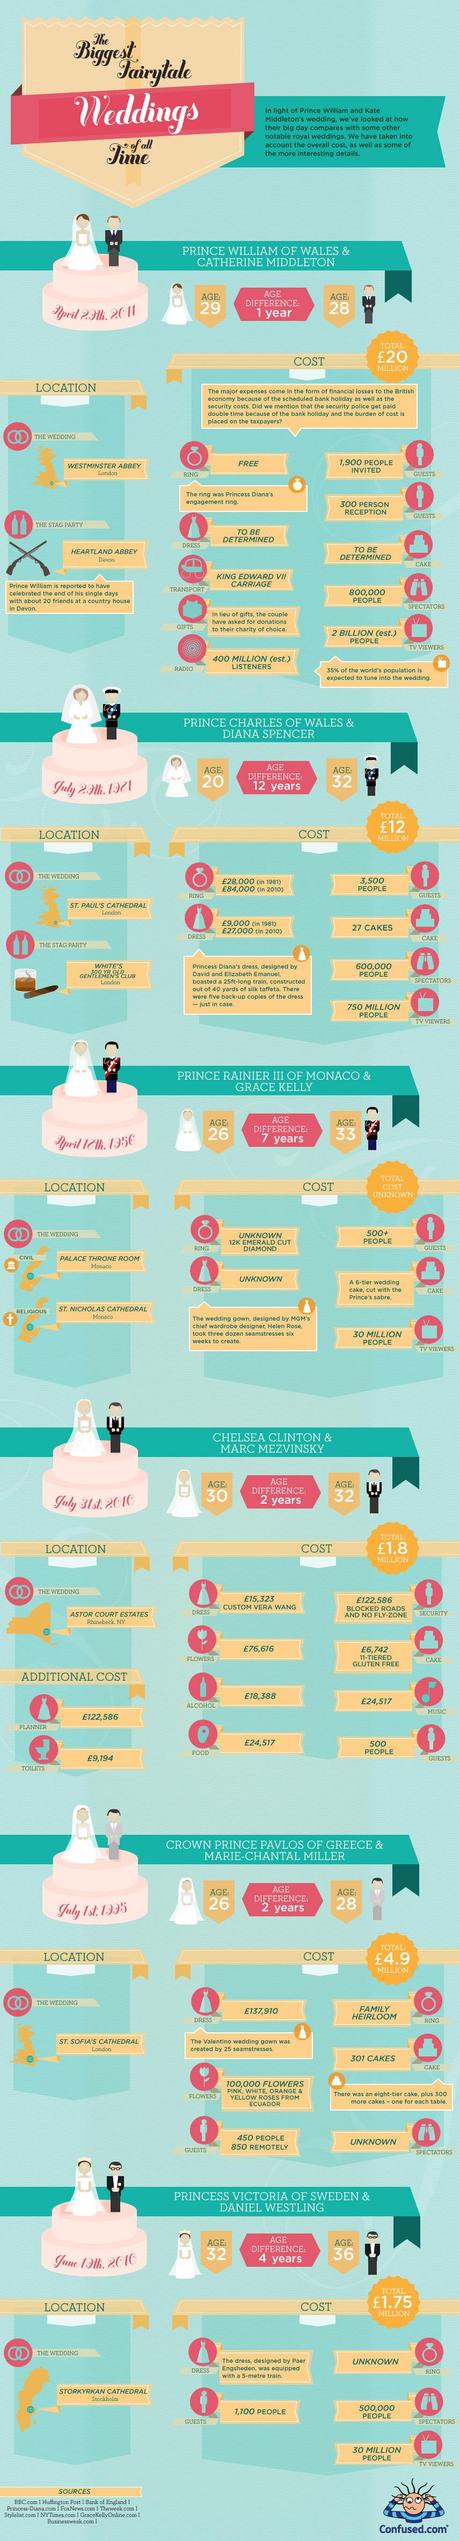 Infographic That Compares Royal Weddings